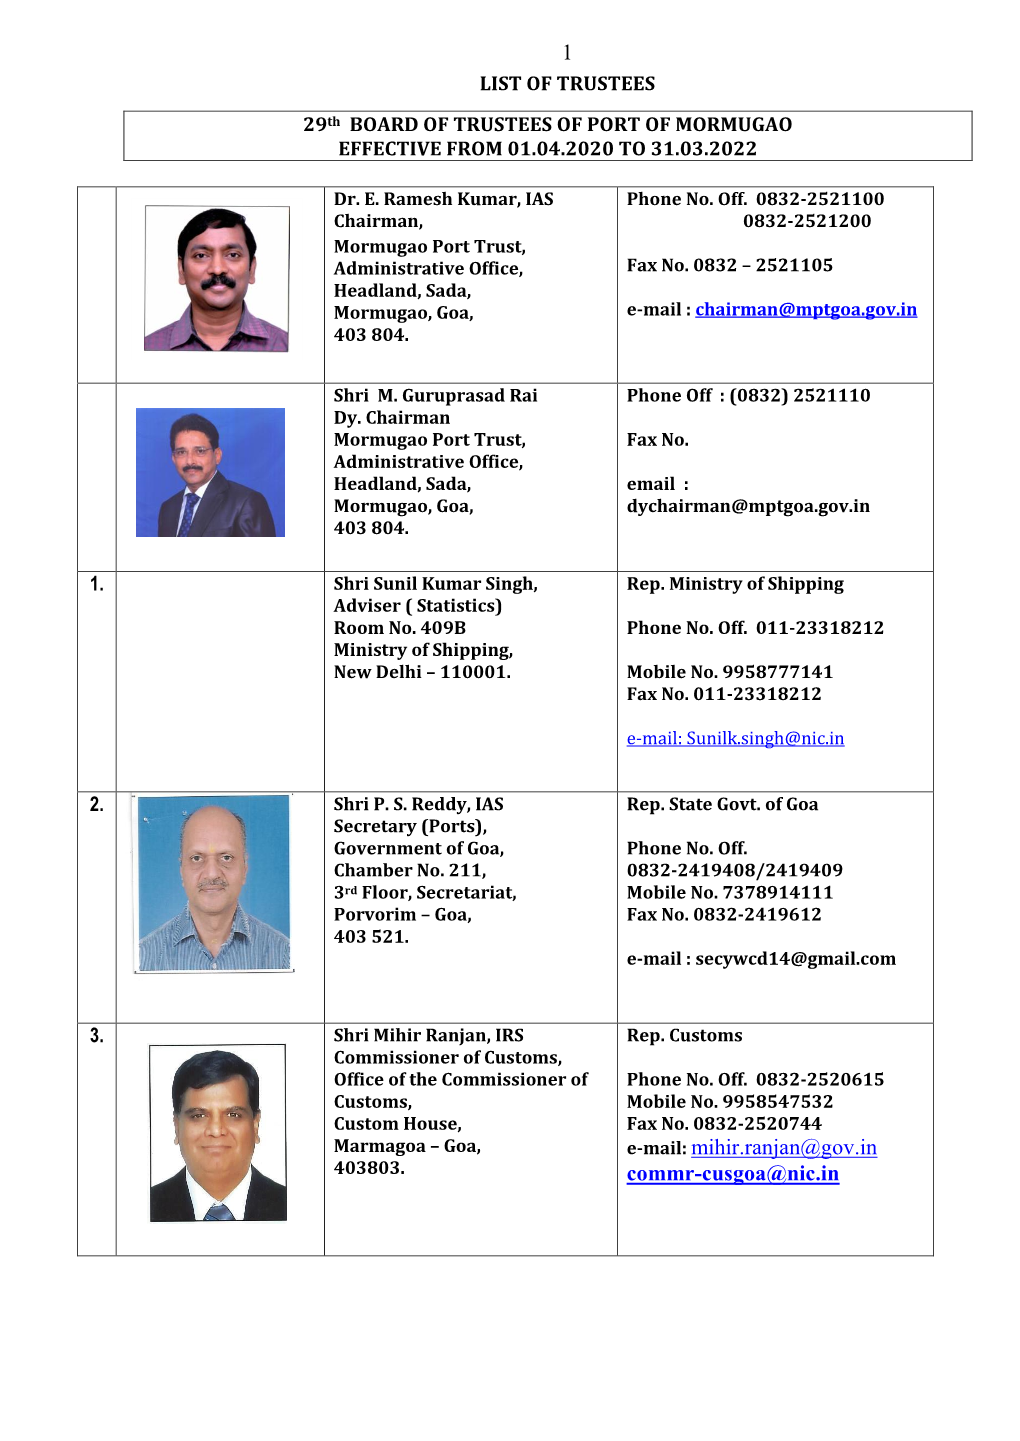 Board of Trustees of Port of Mormugao Effective from 01.04.2020 to 31.03.2022